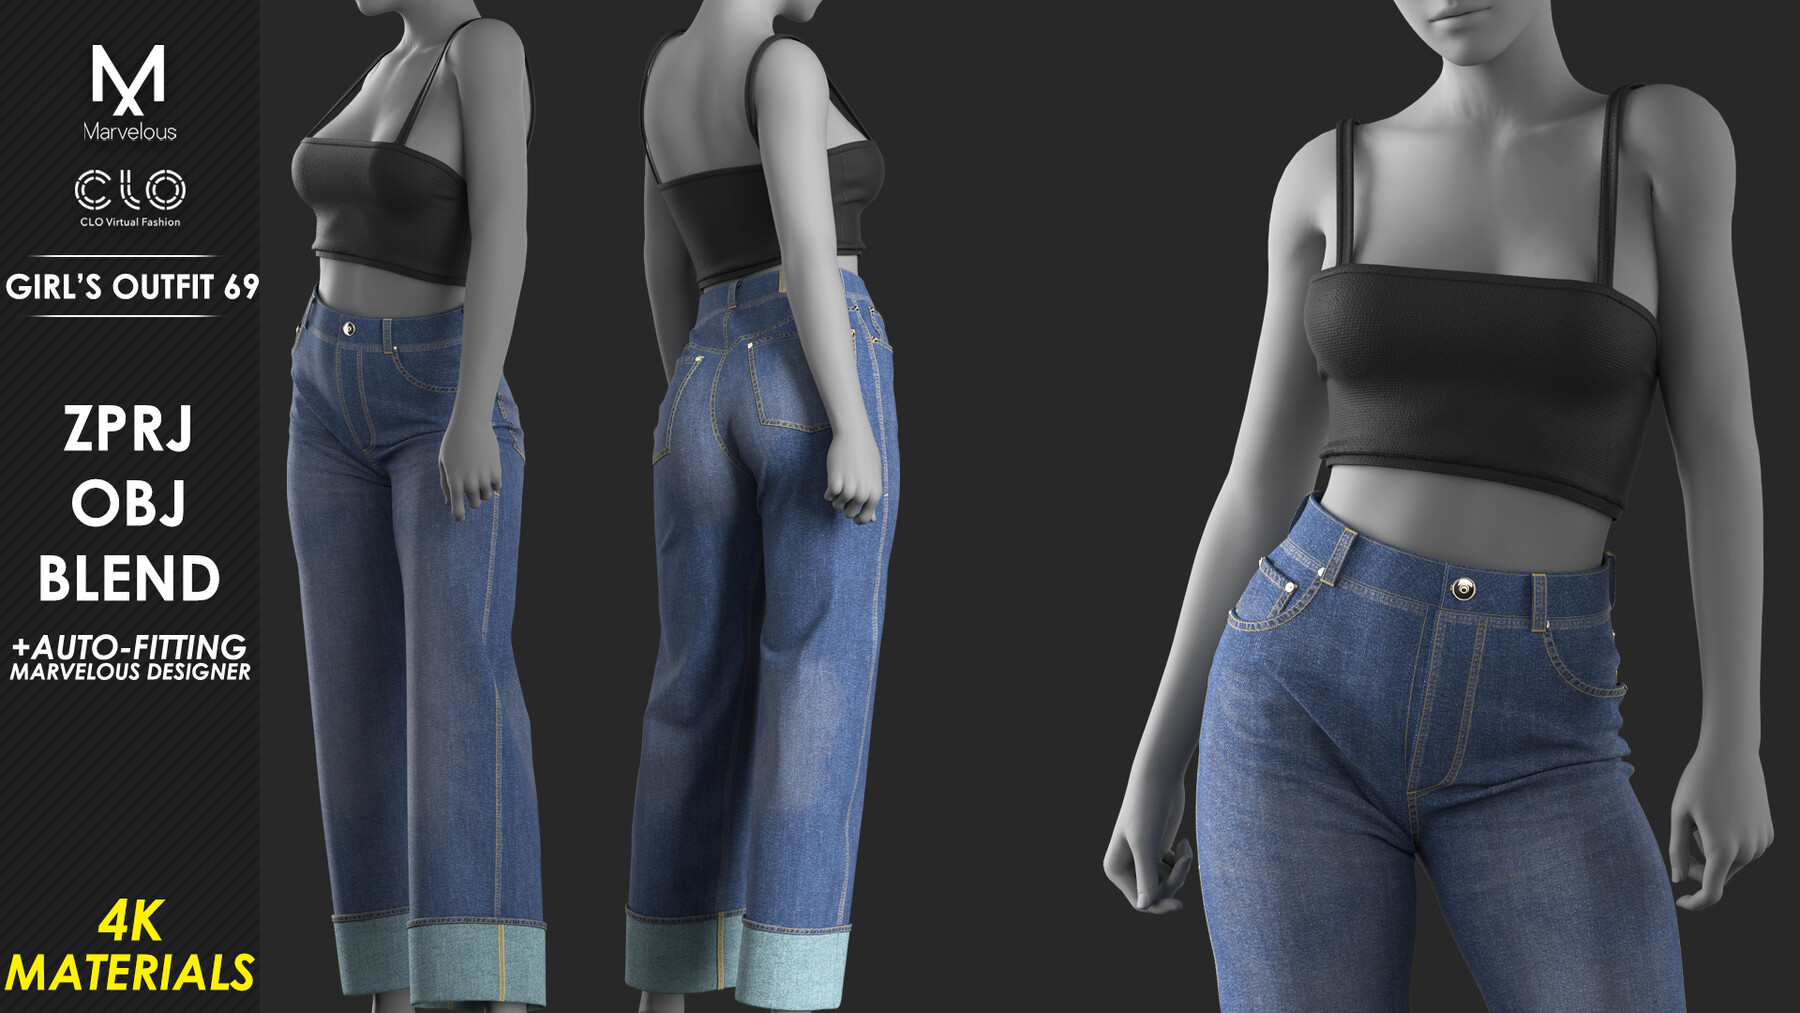 ArtStation - Girl's Outfit 69 - Marvelous / CLO Project file | Game Assets